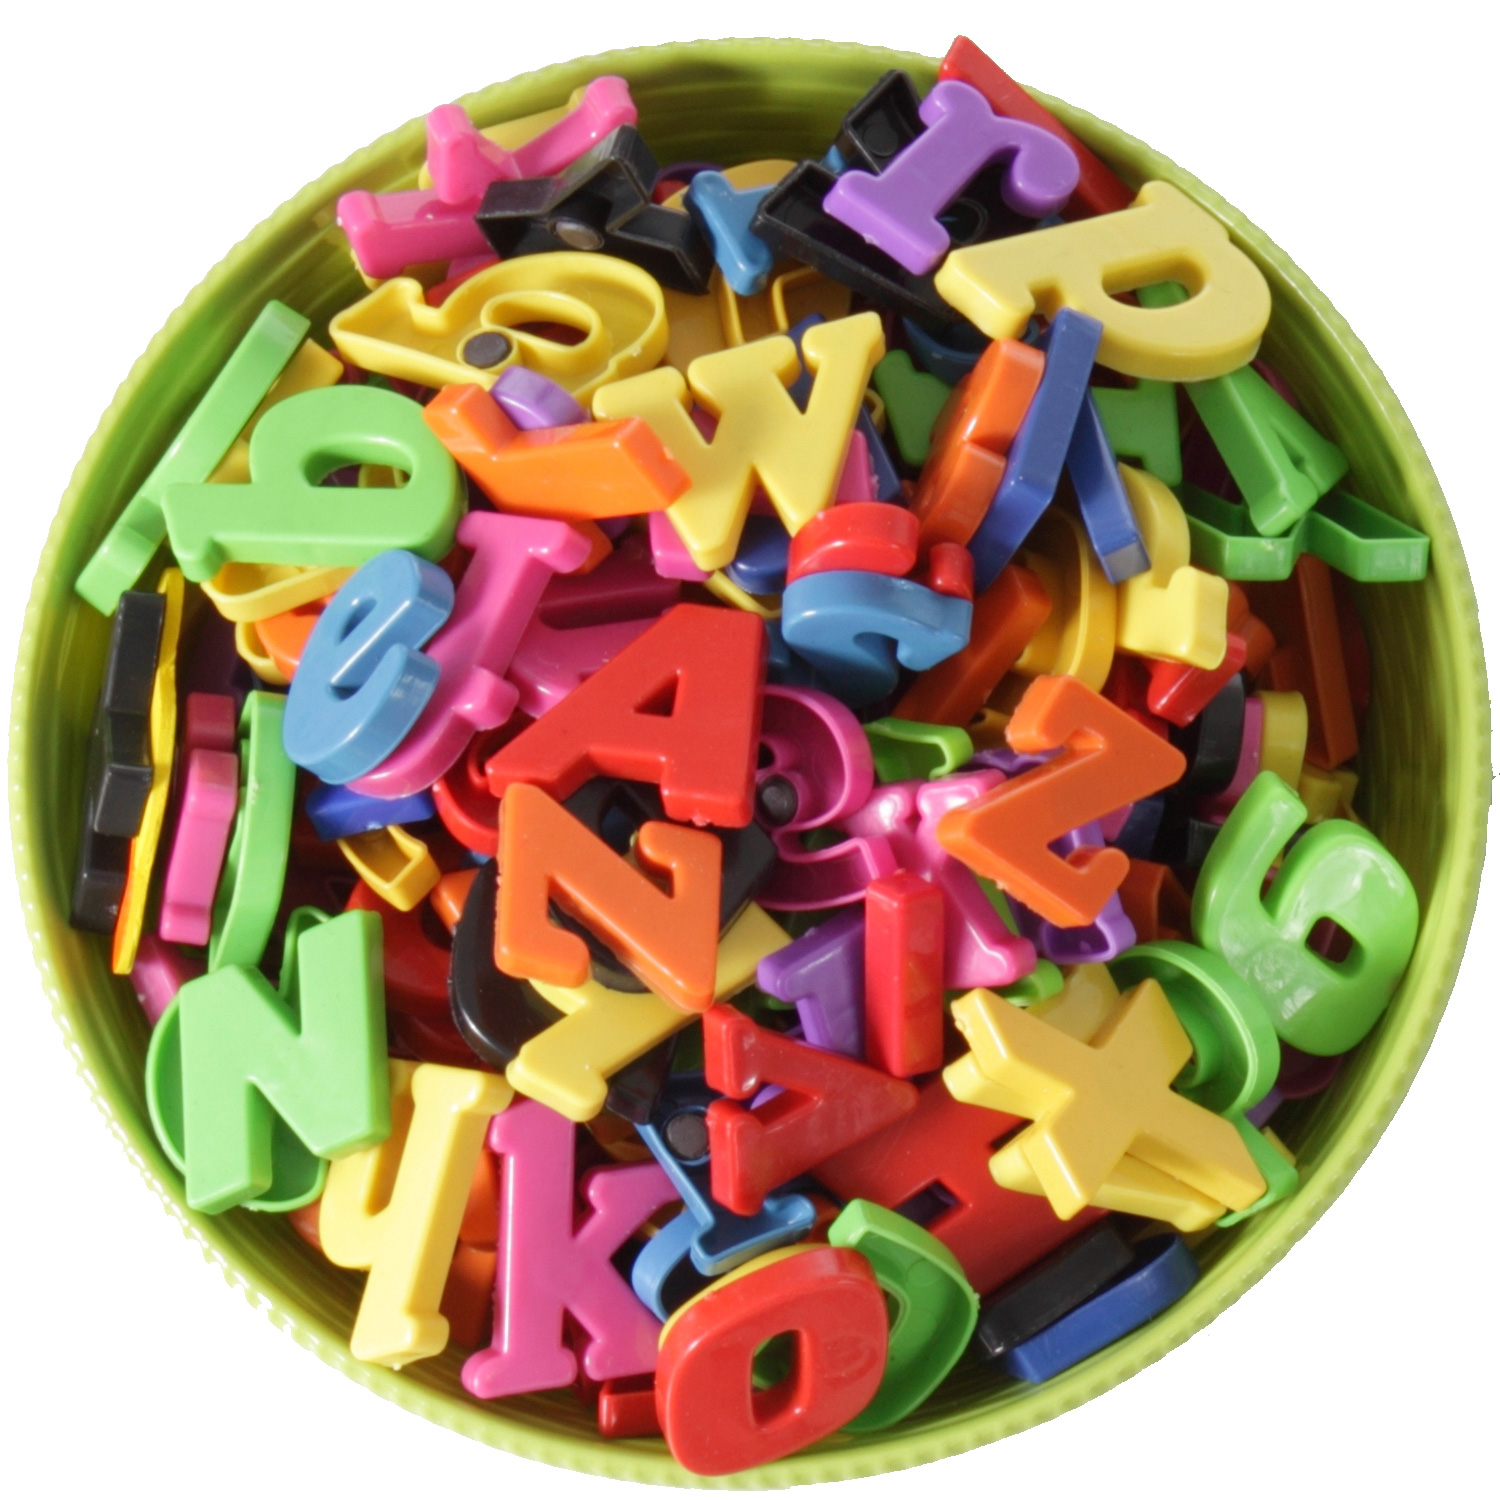 Letter learning for one-year-olds, developed by education experts.